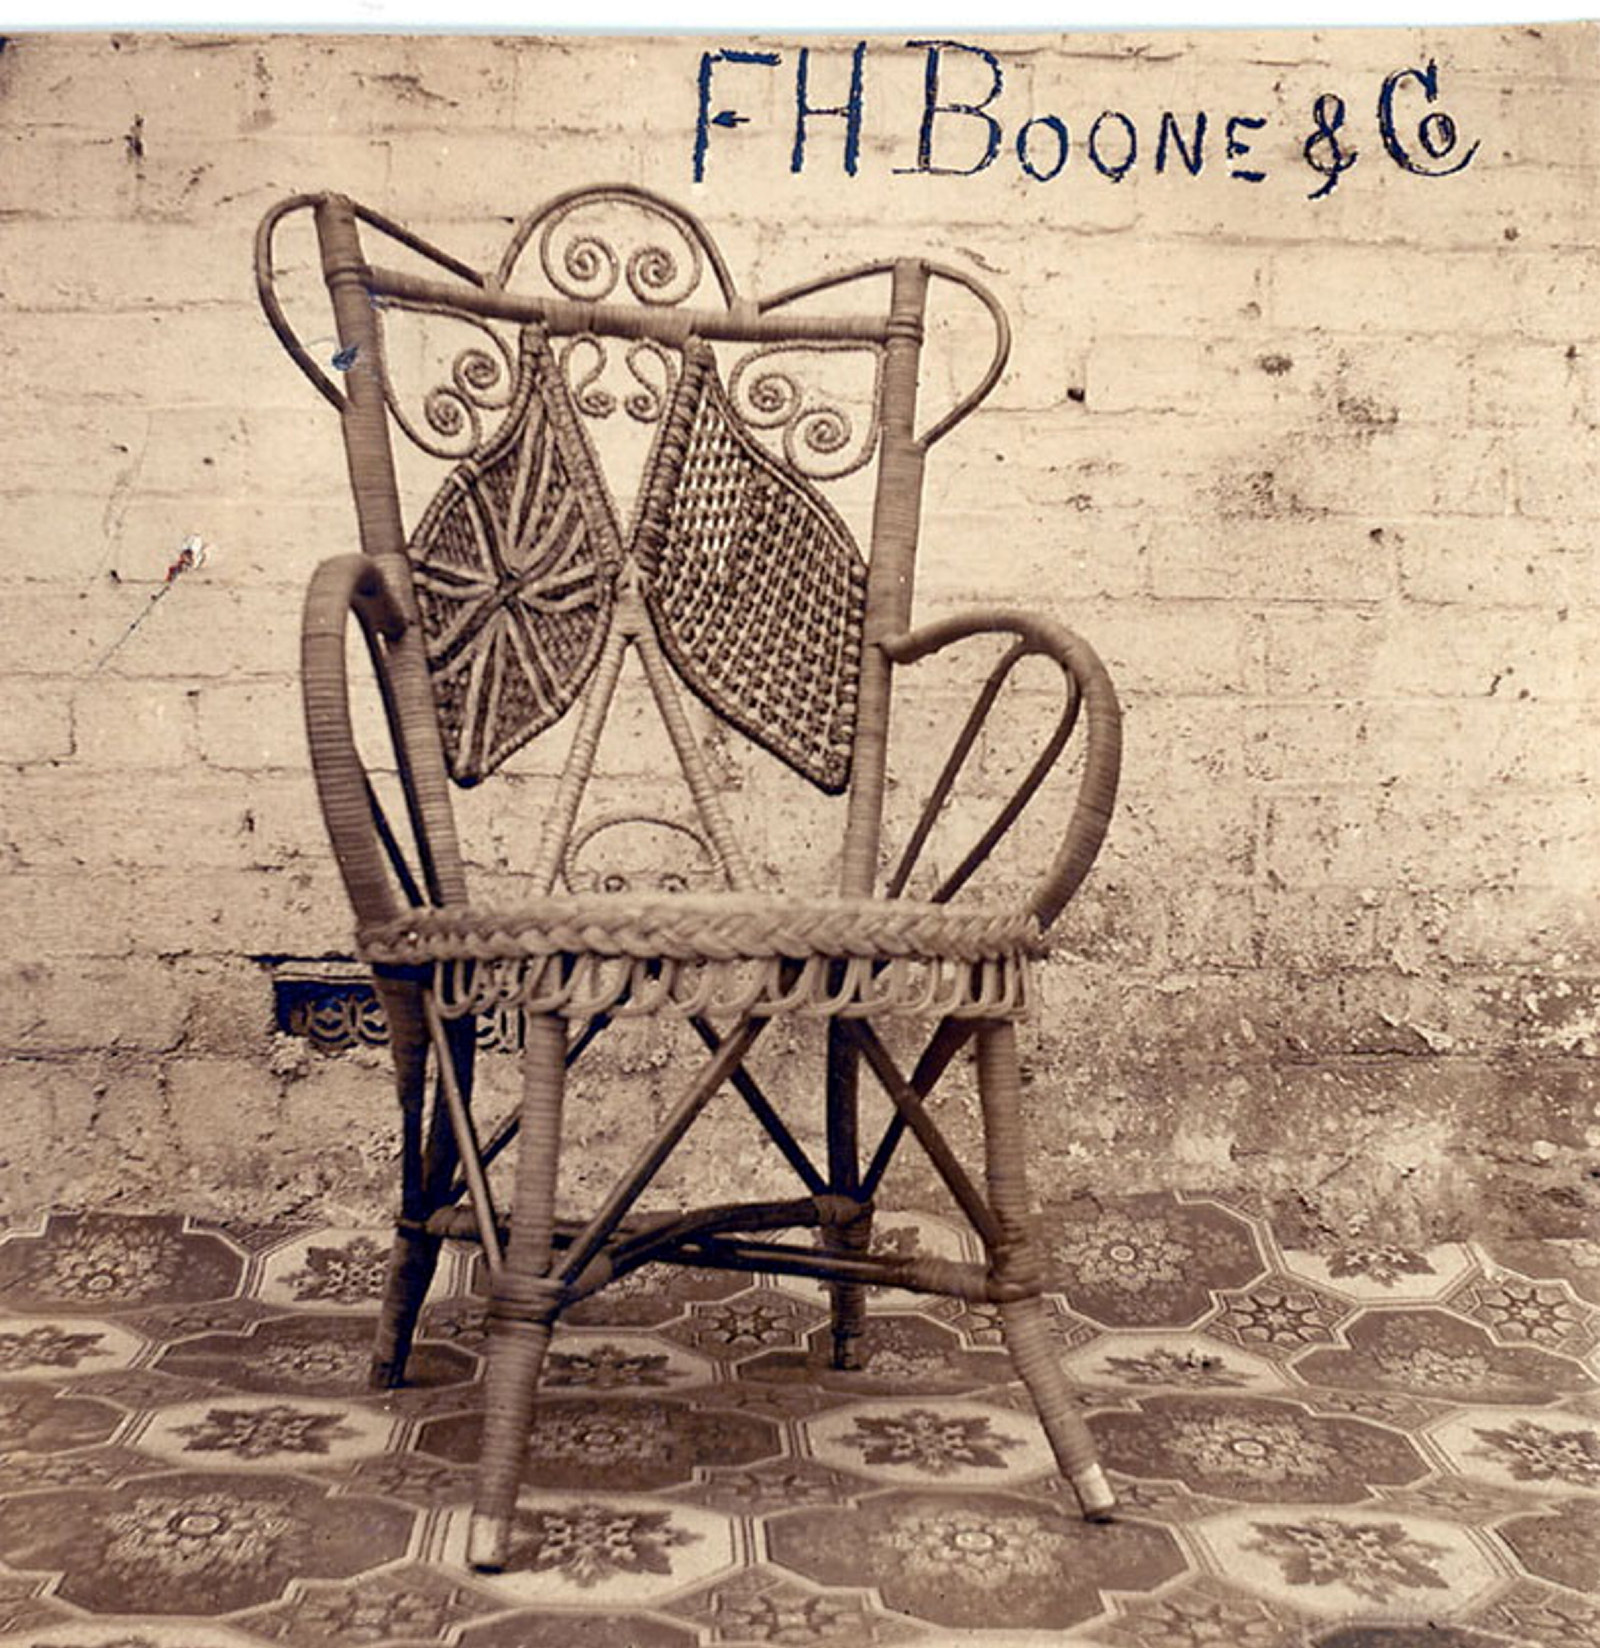 Wicker chairs made by FH Boone & Co. NRS 905 [5/6990]